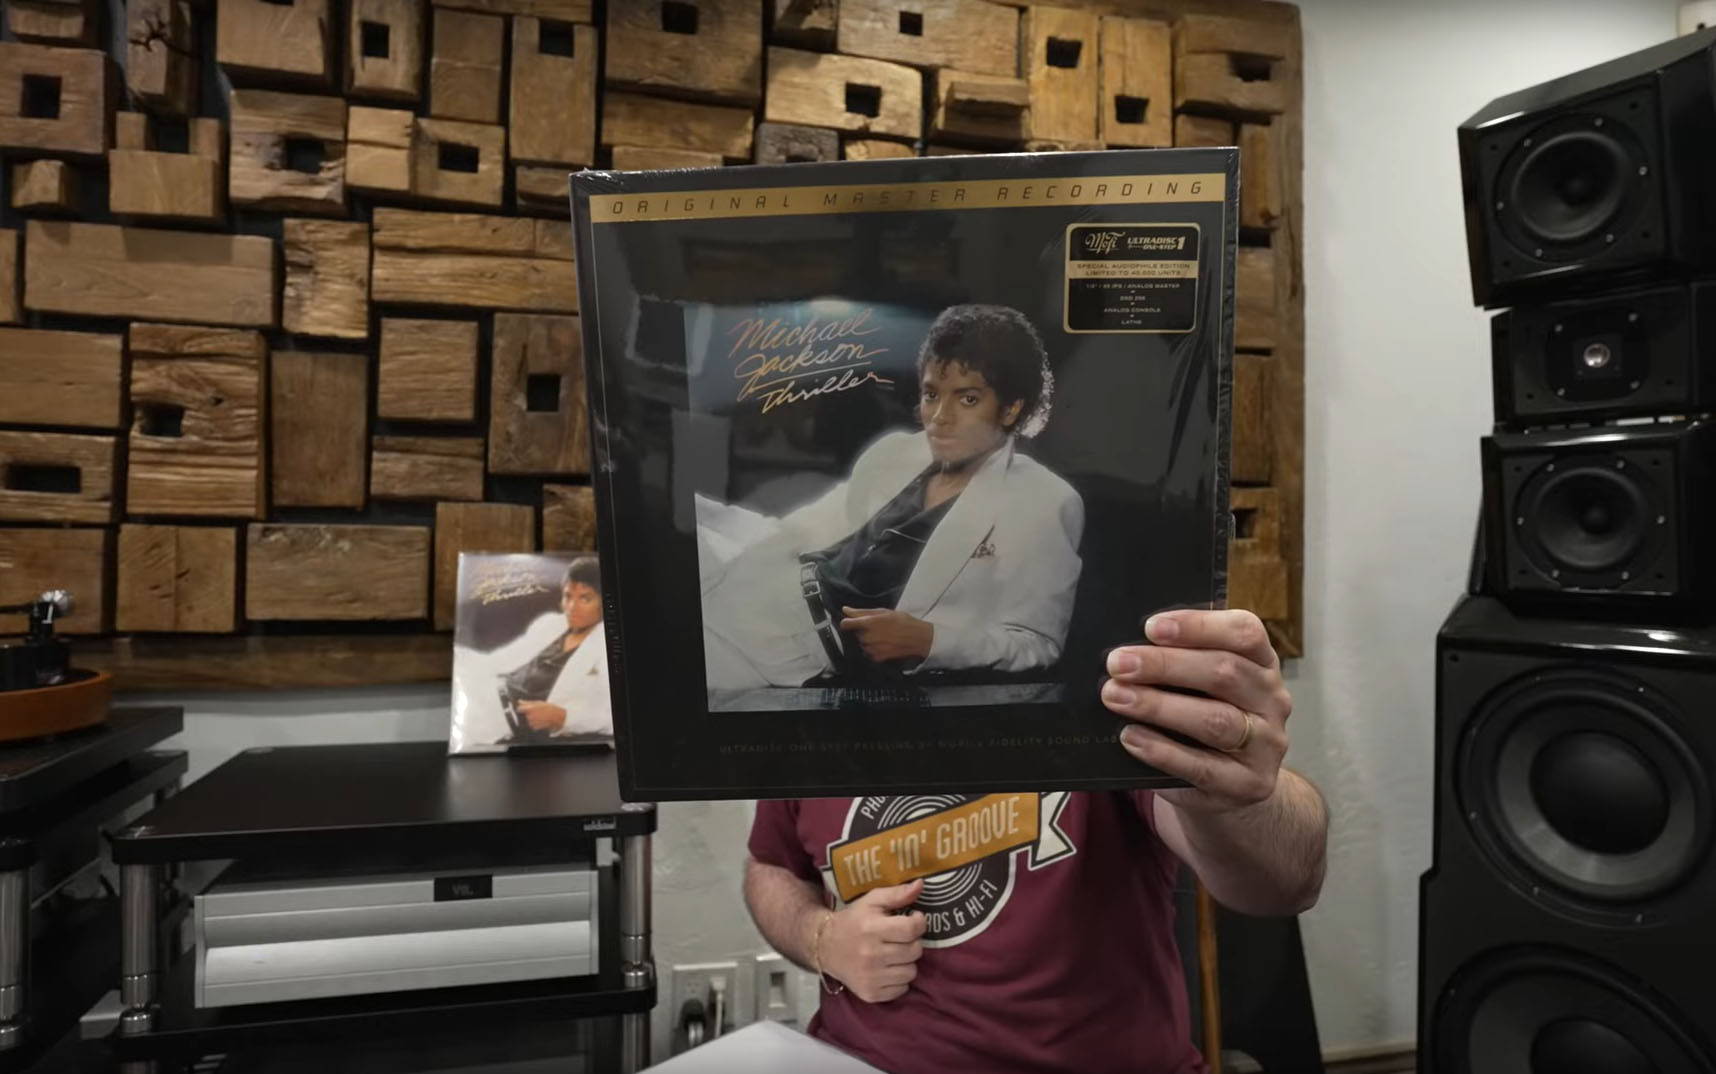 The First Review of MoFi's UD1S LP Set of Michael Jackson's Thriller Is Live!